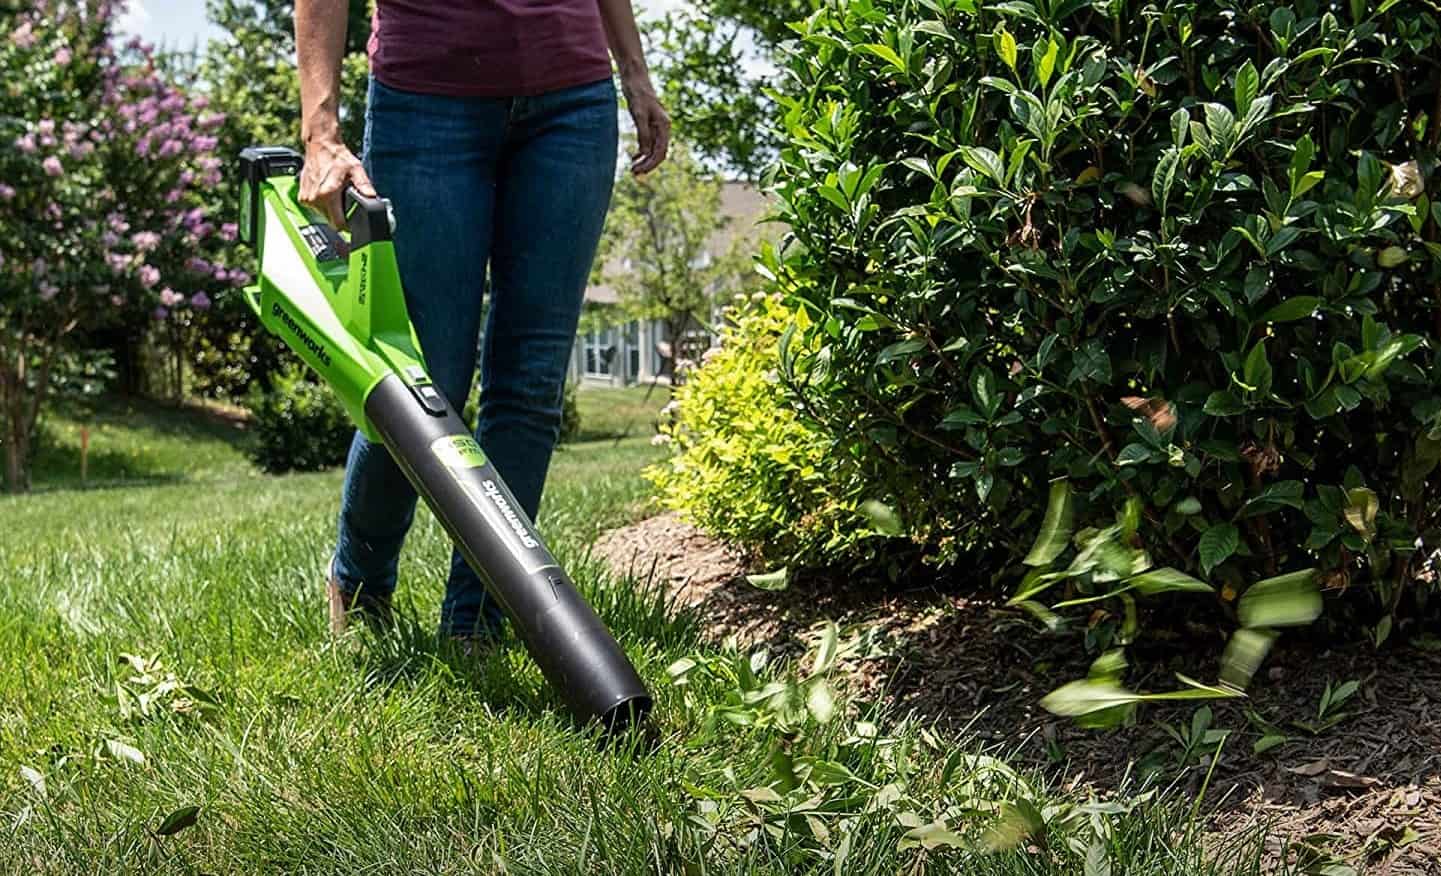 a woman uses a cordless leaf blower to blow leaves from a lawn